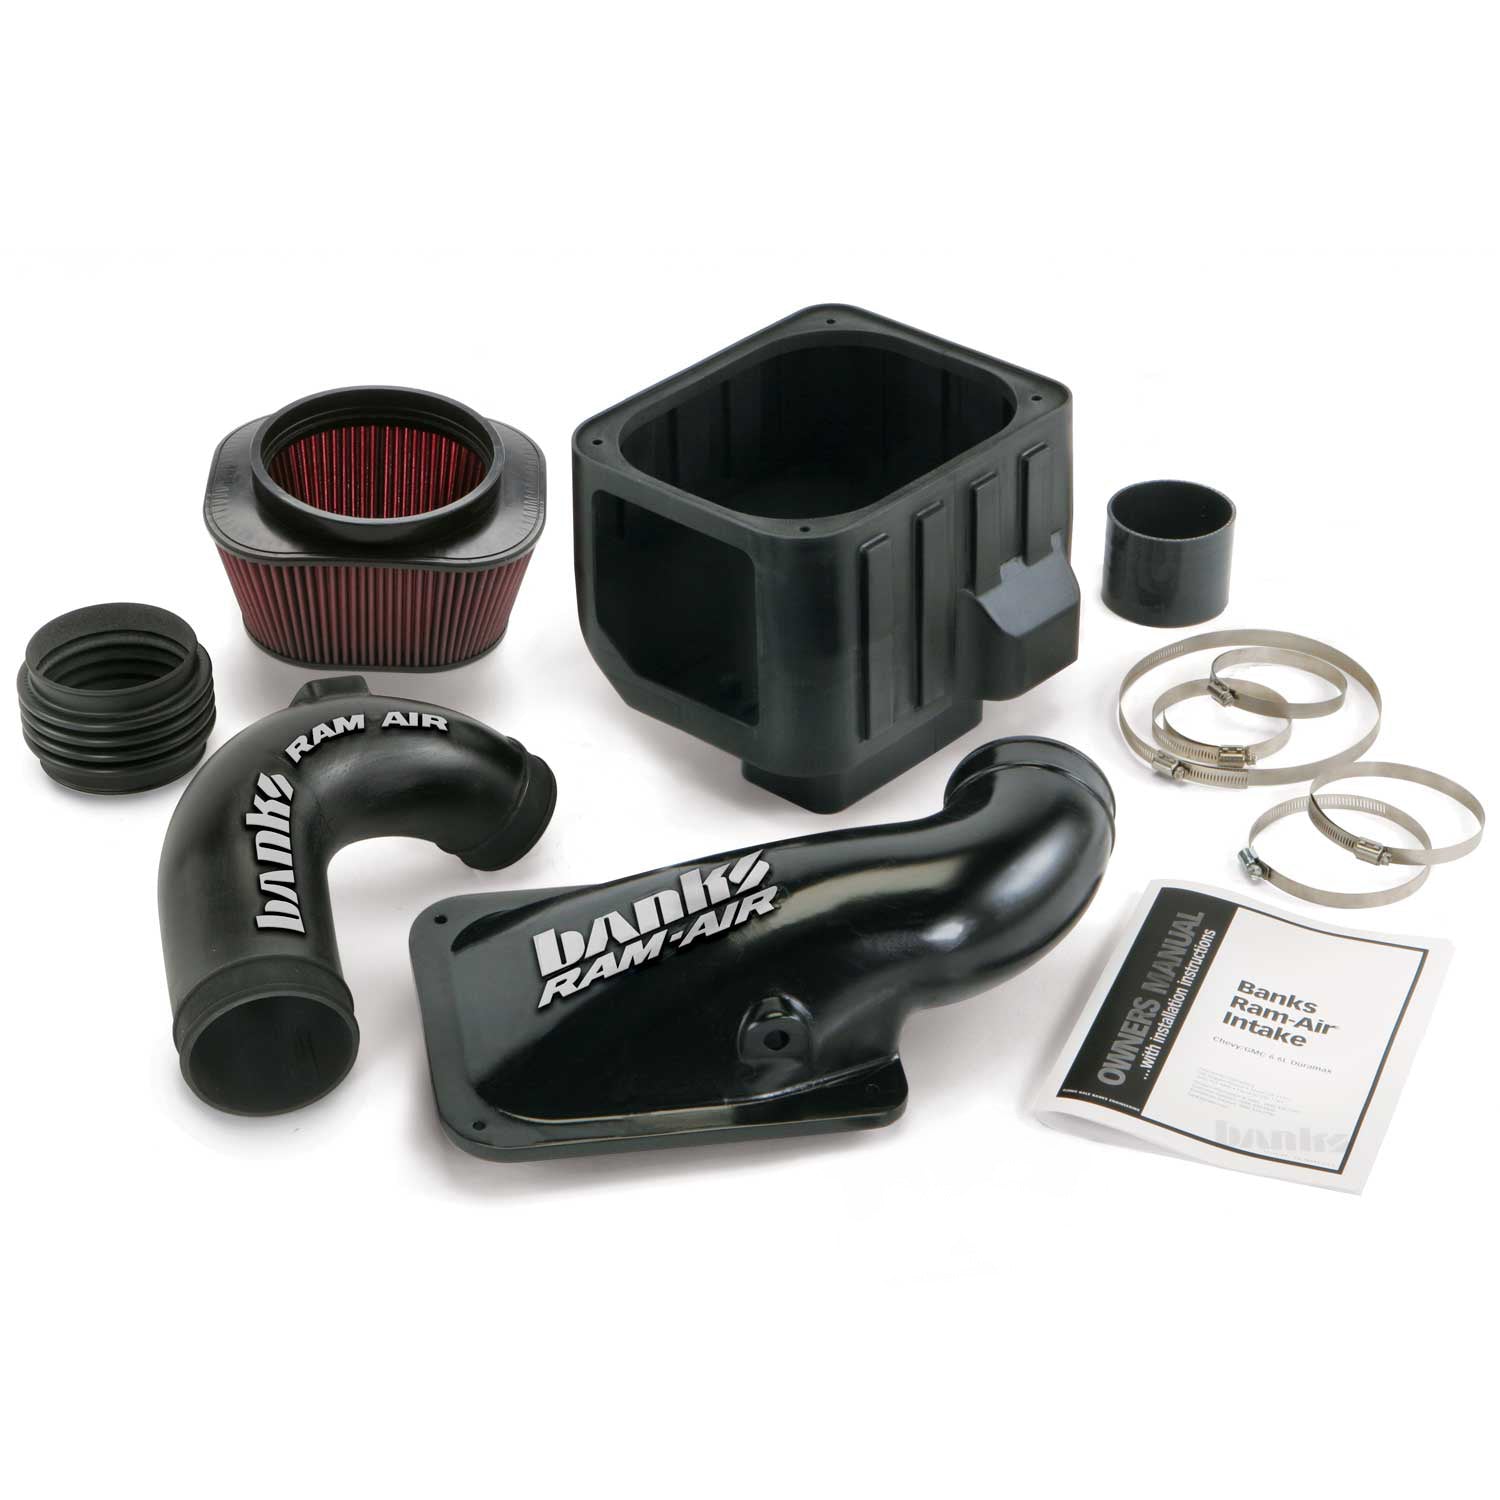 Components of the Banks Ram-Air intake for 2006-2007 Duramax LLY